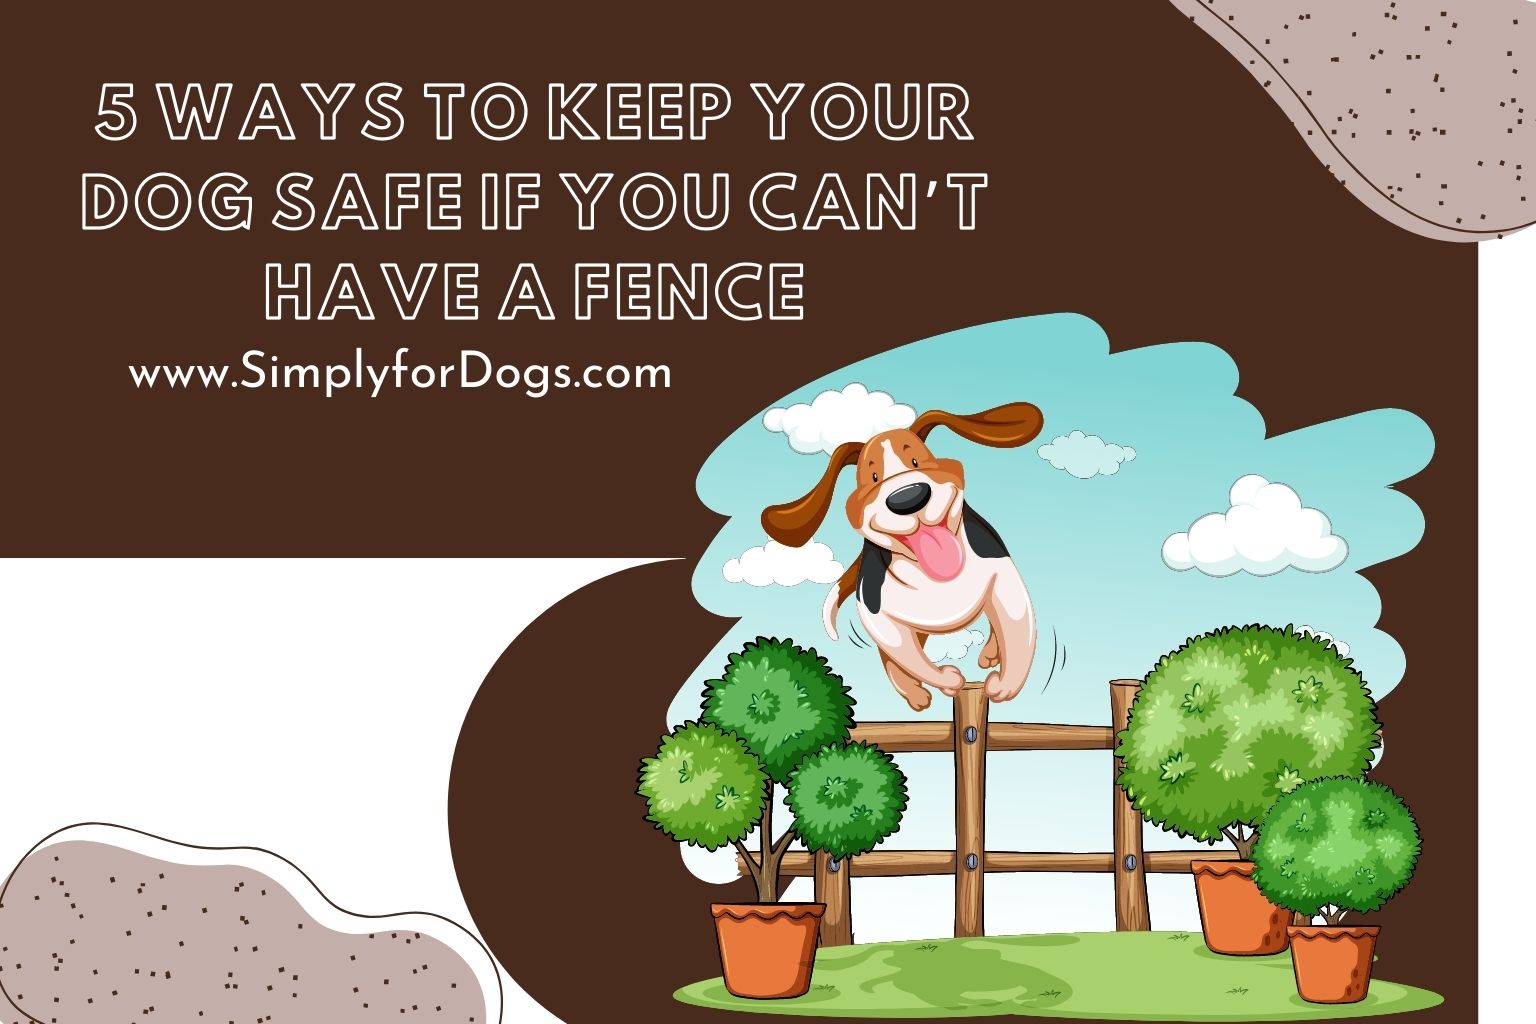 5 Ways to Keep Your Dog Safe If You Can’t Have a Fence